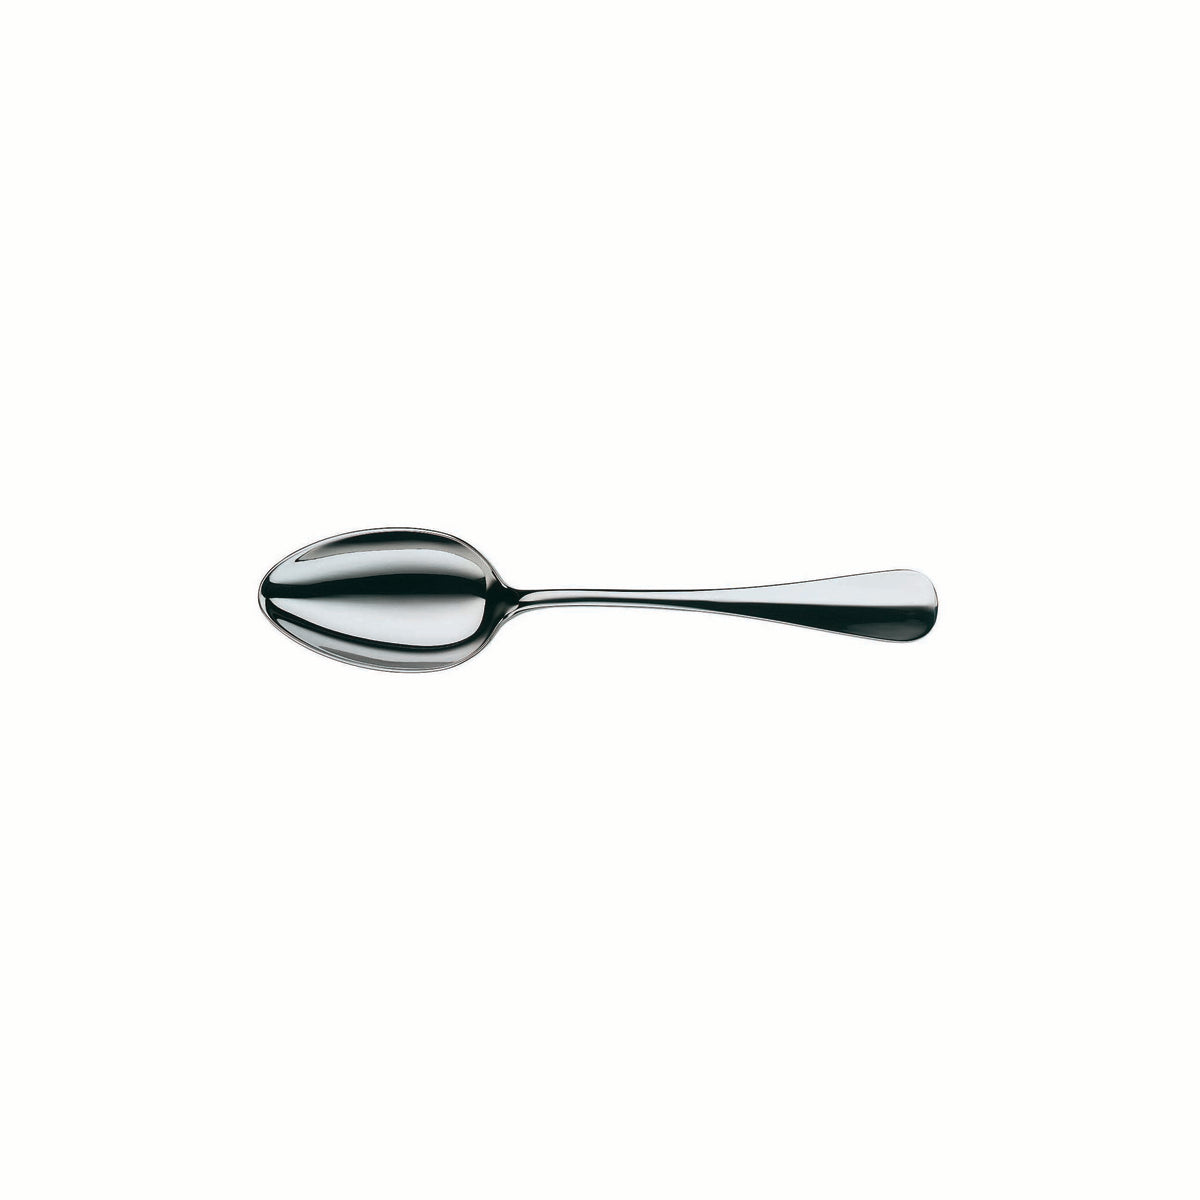 01.0101.6060 WMF Baguette Table Spoon Silverplated Tomkin Australia Hospitality Supplies